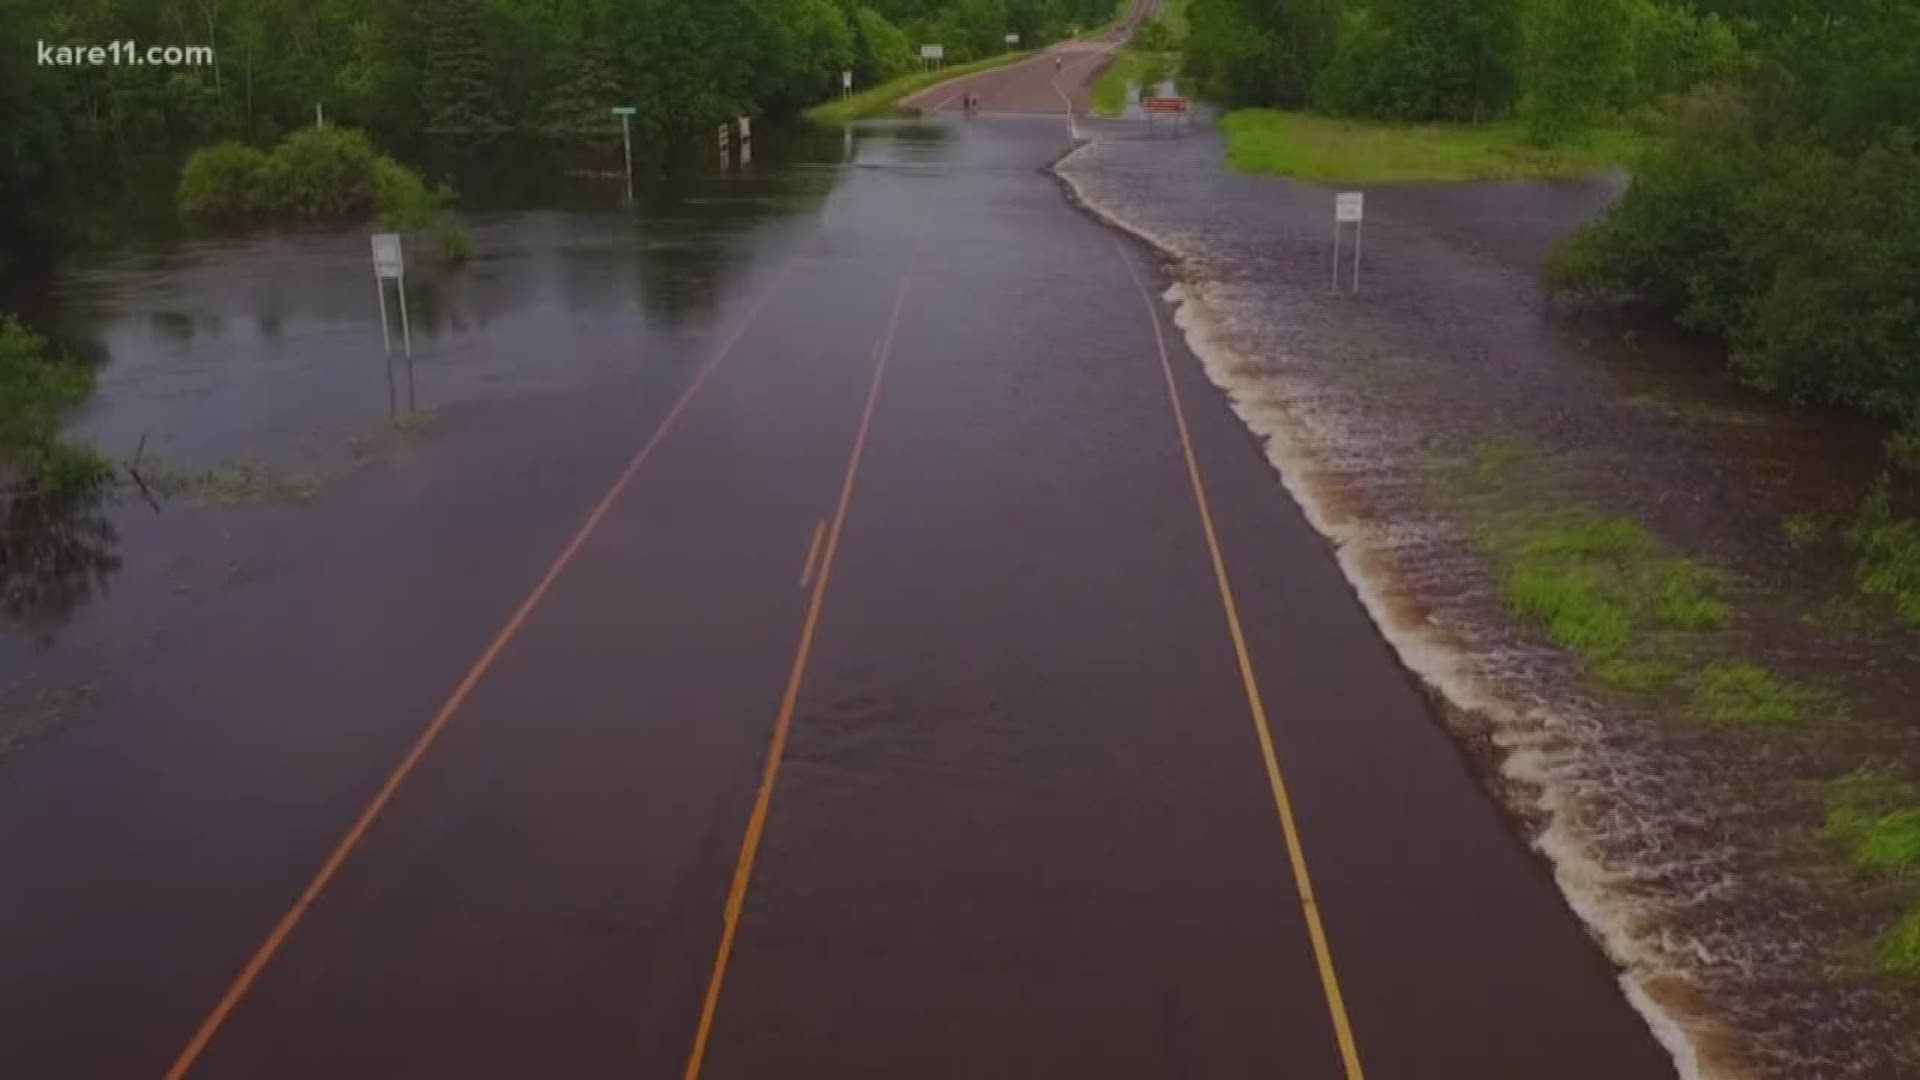 Heavy rains have caused an earthen dam to fail in a rural area of northwestern Wisconsin. https://kare11.tv/2HZfoXu